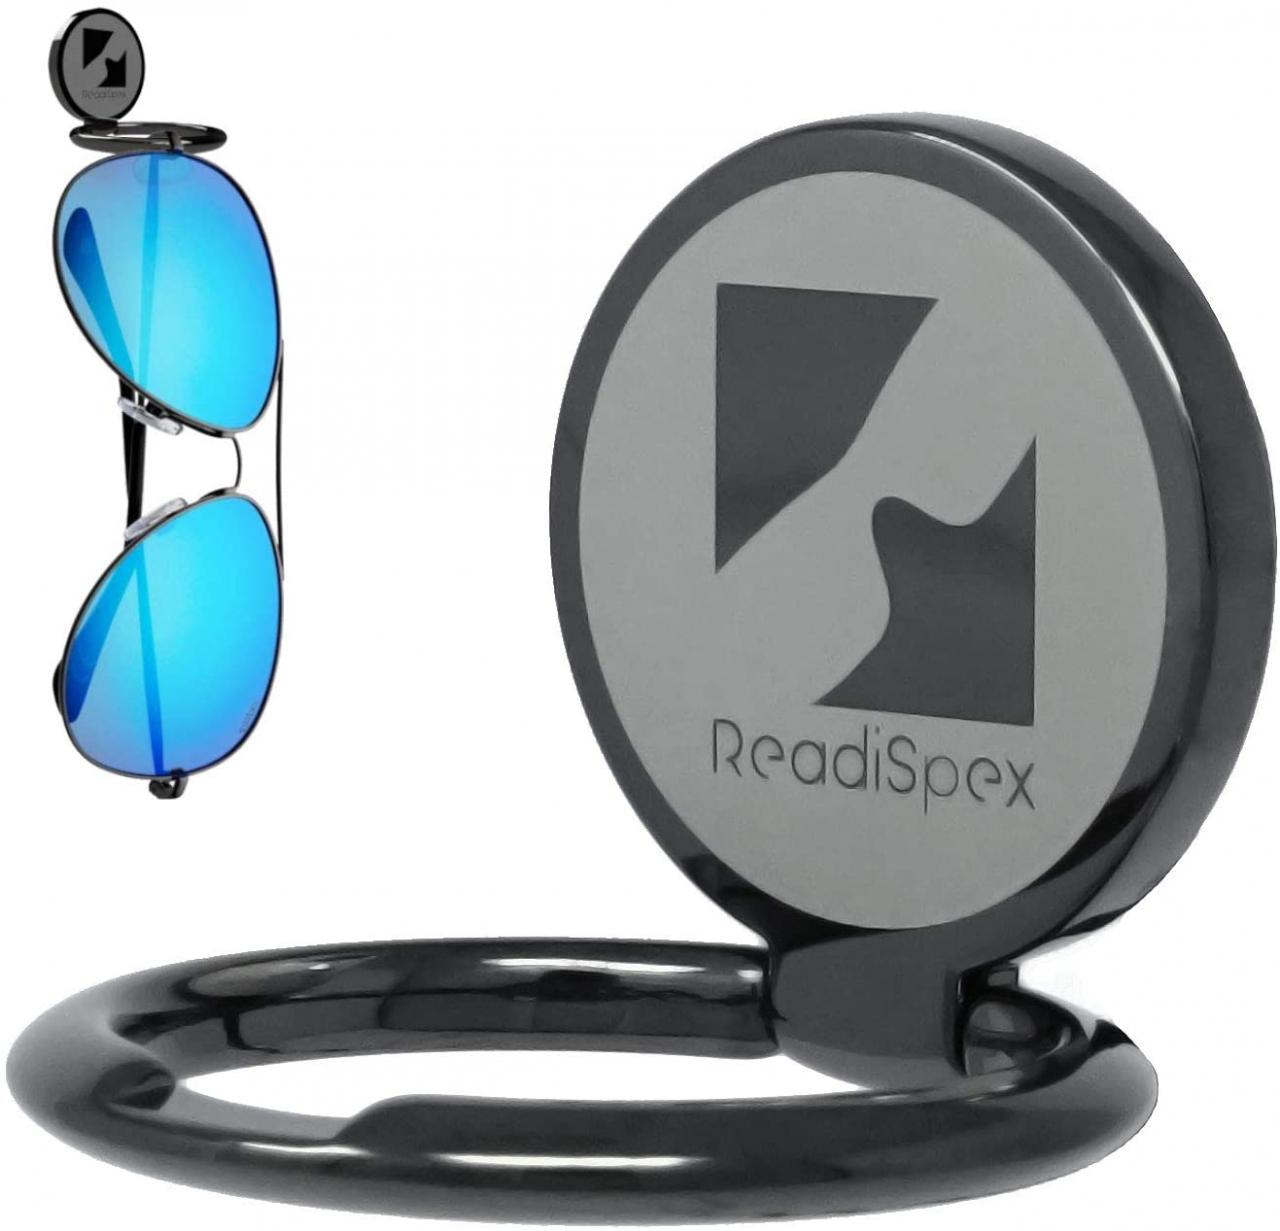 How To Install Your ReadiSpex Sunglasses Holder - YouTube